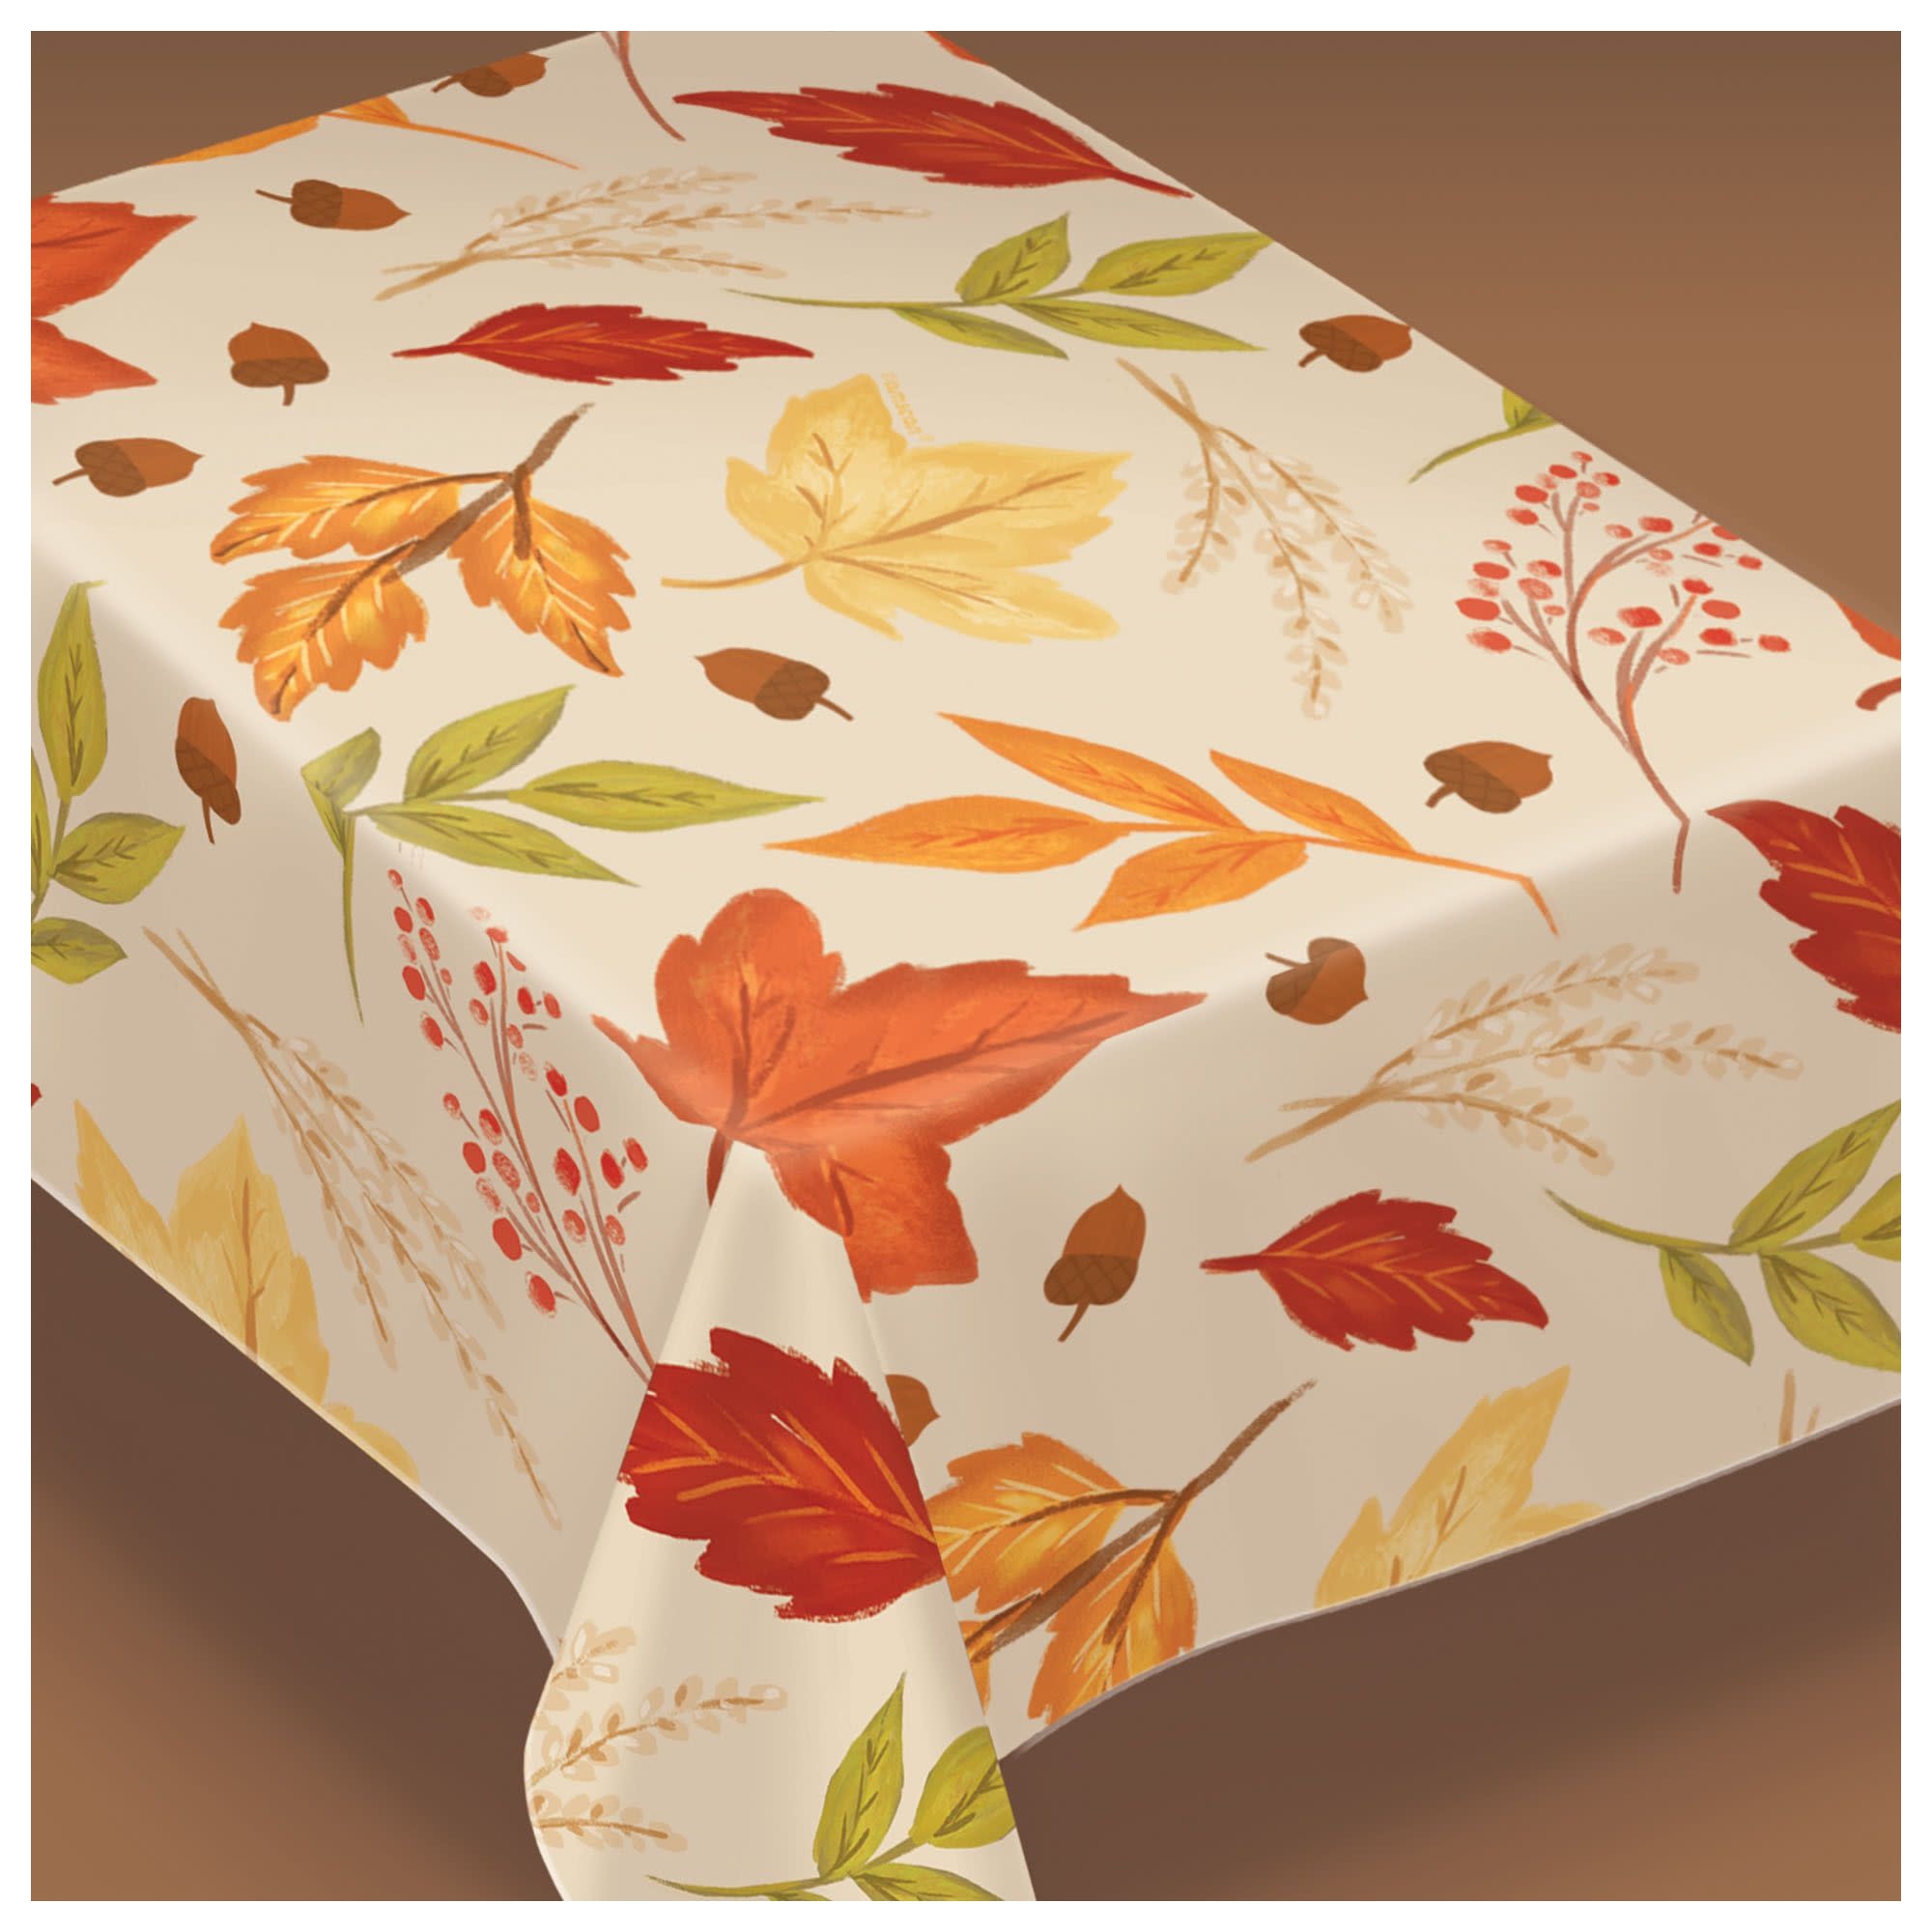 Fall Foliage Table Cover - Flannel-Backed Vinyl